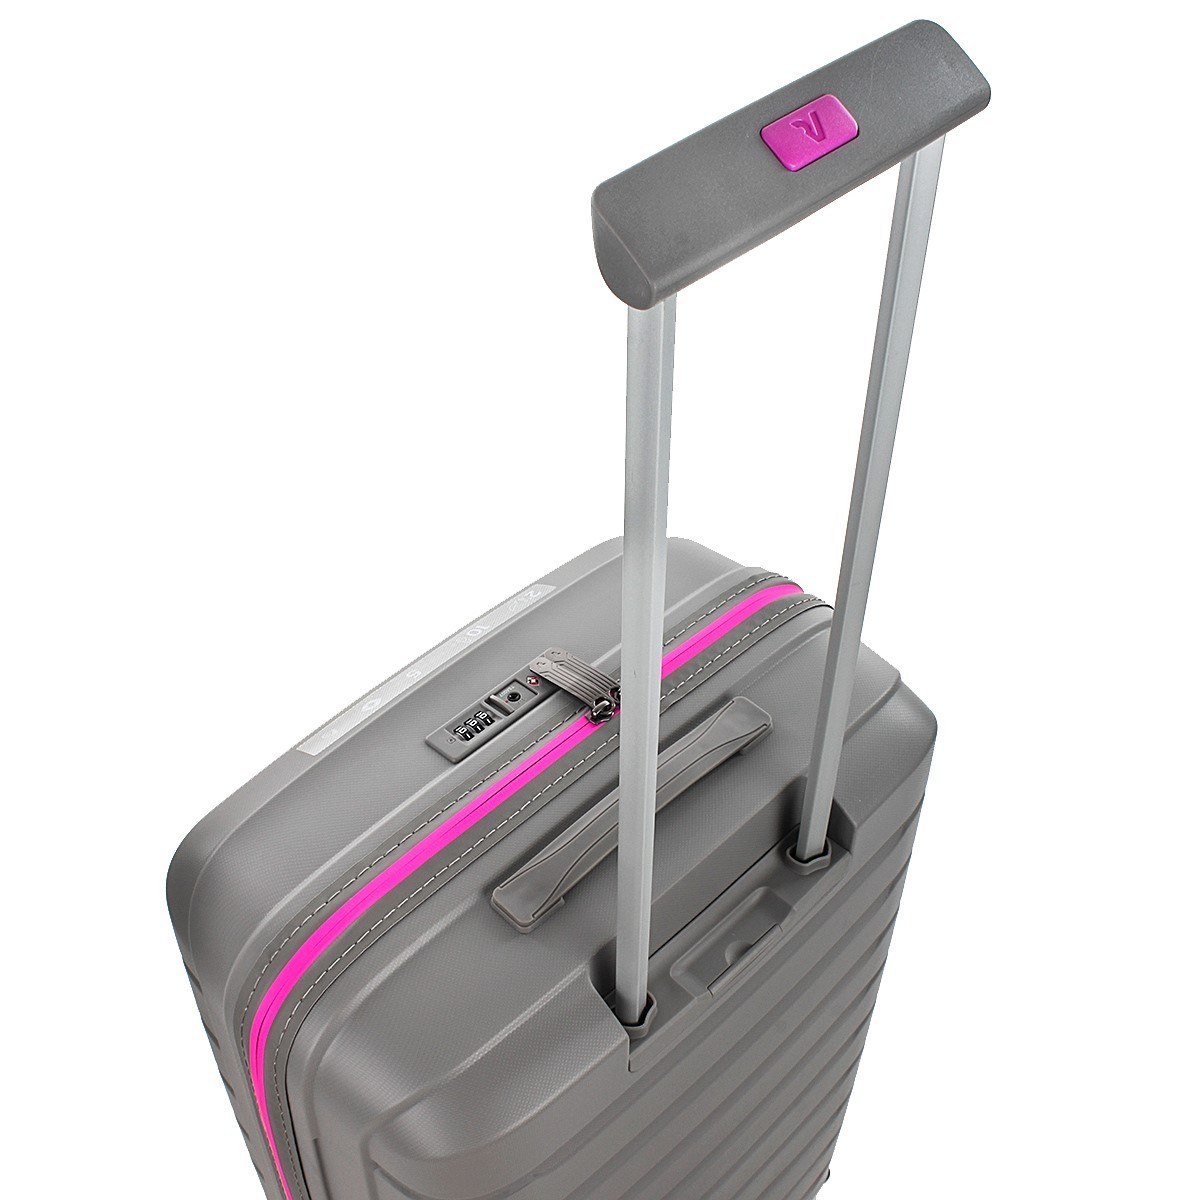 Roncato Spinner m 4 ruote Grigio/rosa Butterfly neon 417982